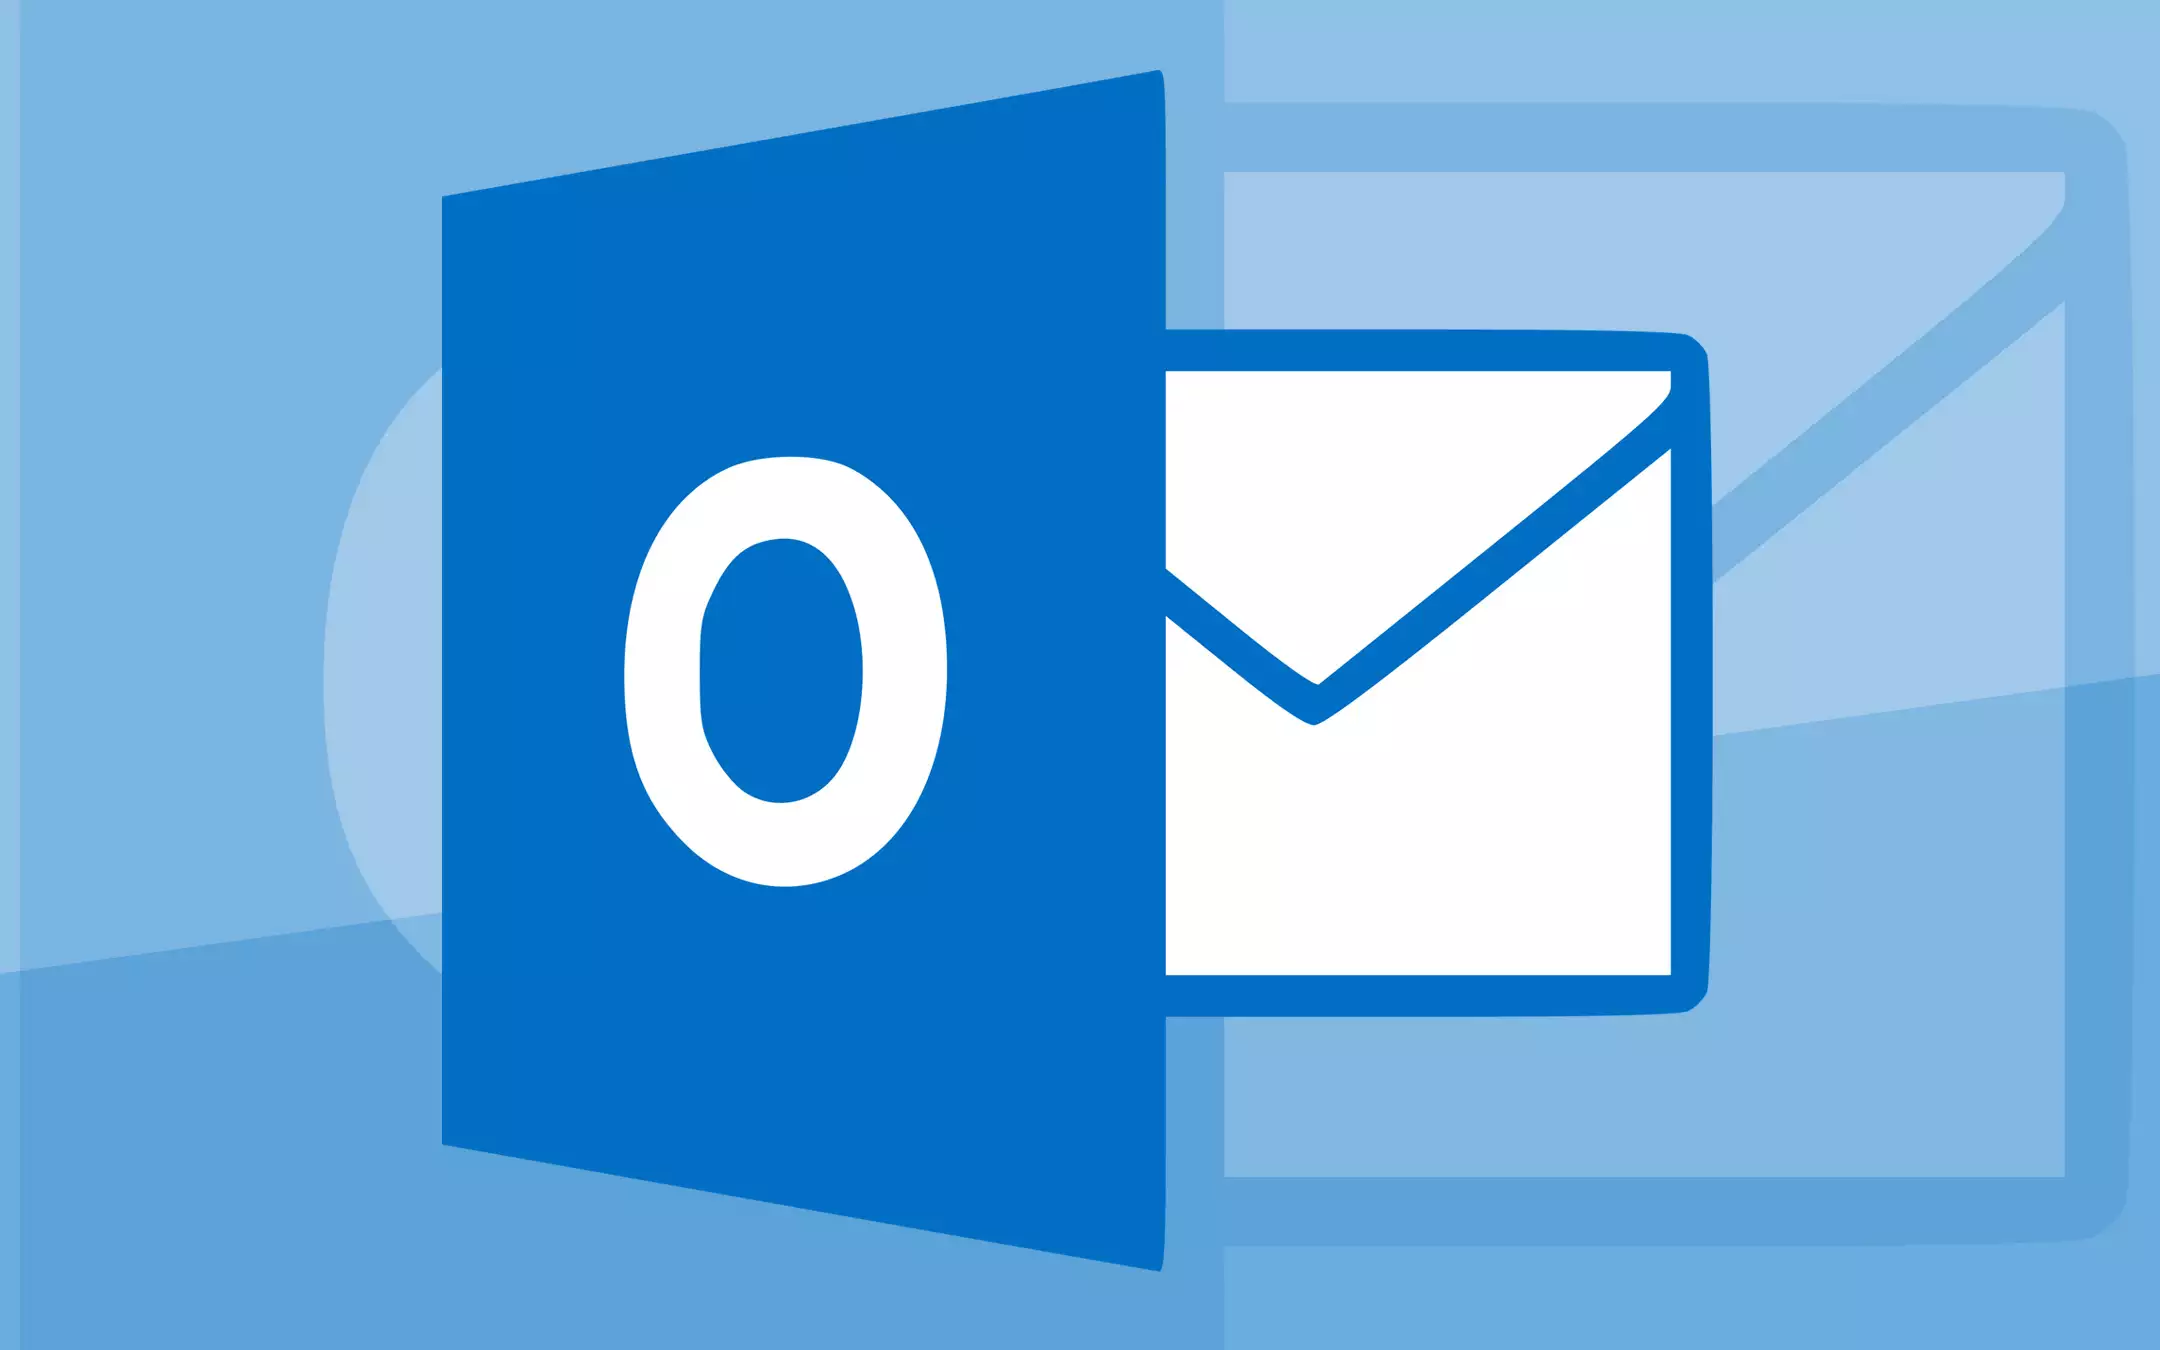 Https mail outlook. Microsoft Outlook 2021. Outlook mail. Microsoft Outlook почта. Значок Outlook.